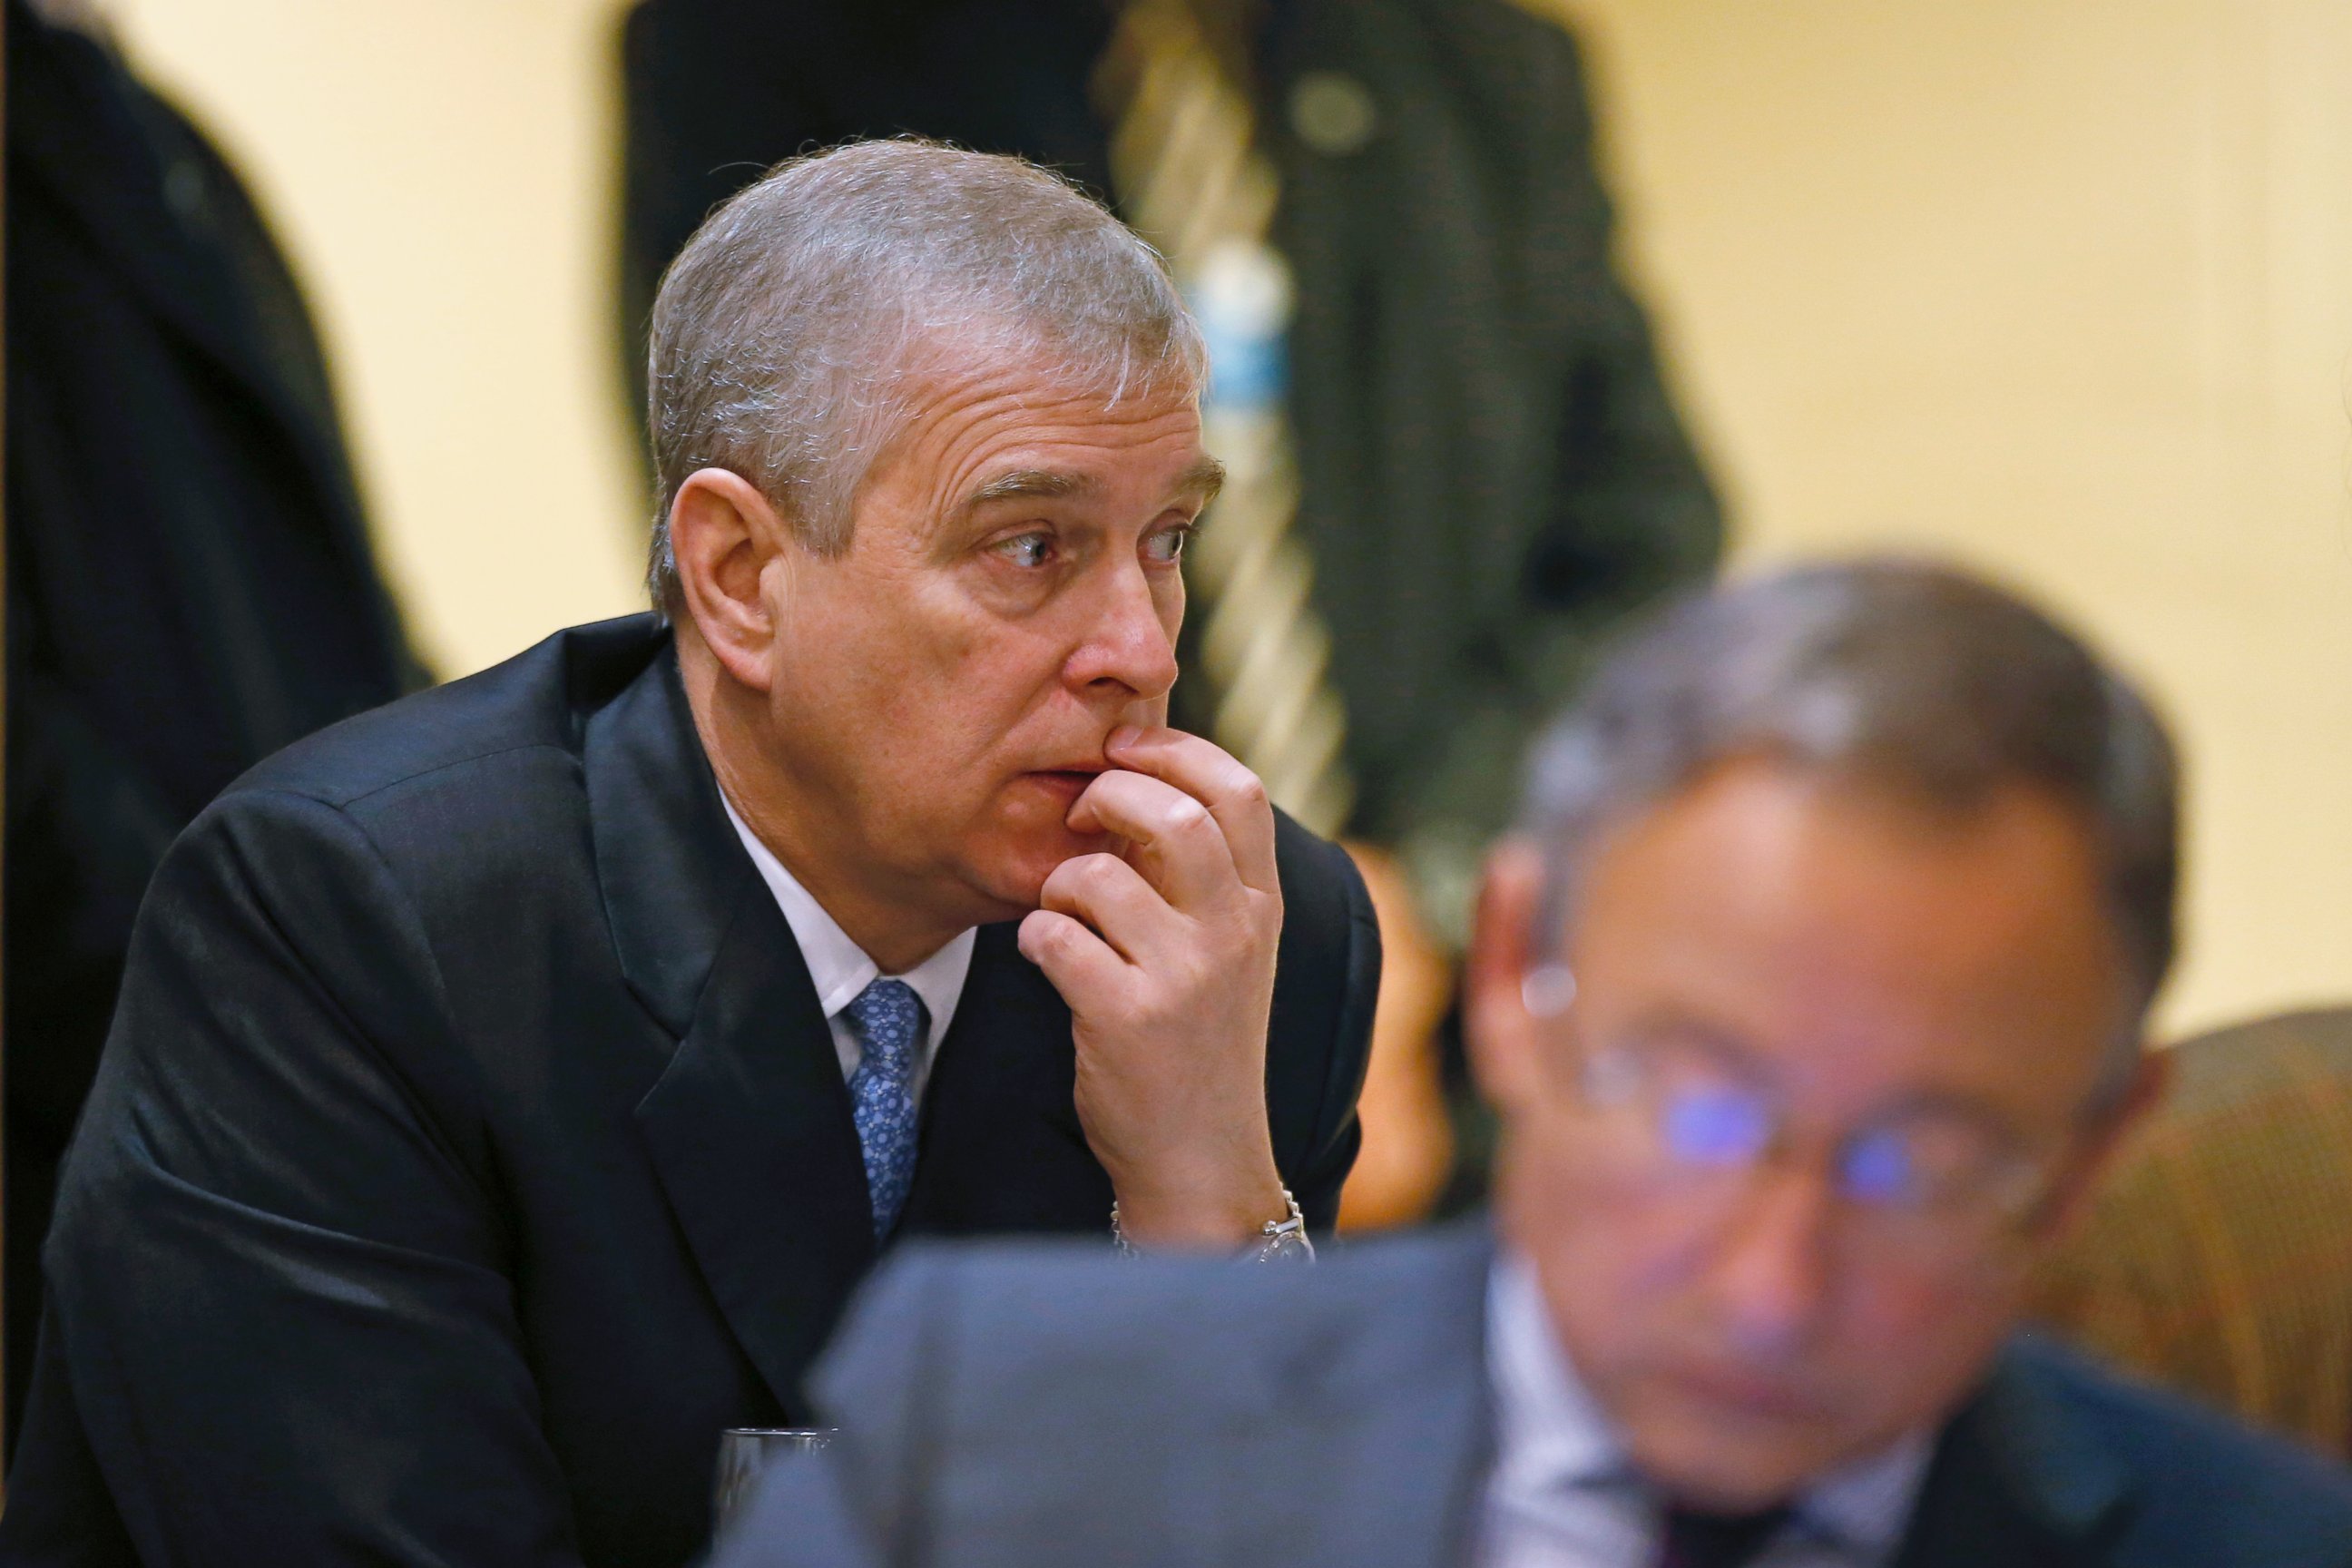 PHOTO: Britain's Prince Andrew, pauses during a break in sessions on day two of the World Economic Forum (WEF) in Davos, Switzerland, Jan. 22, 2015.